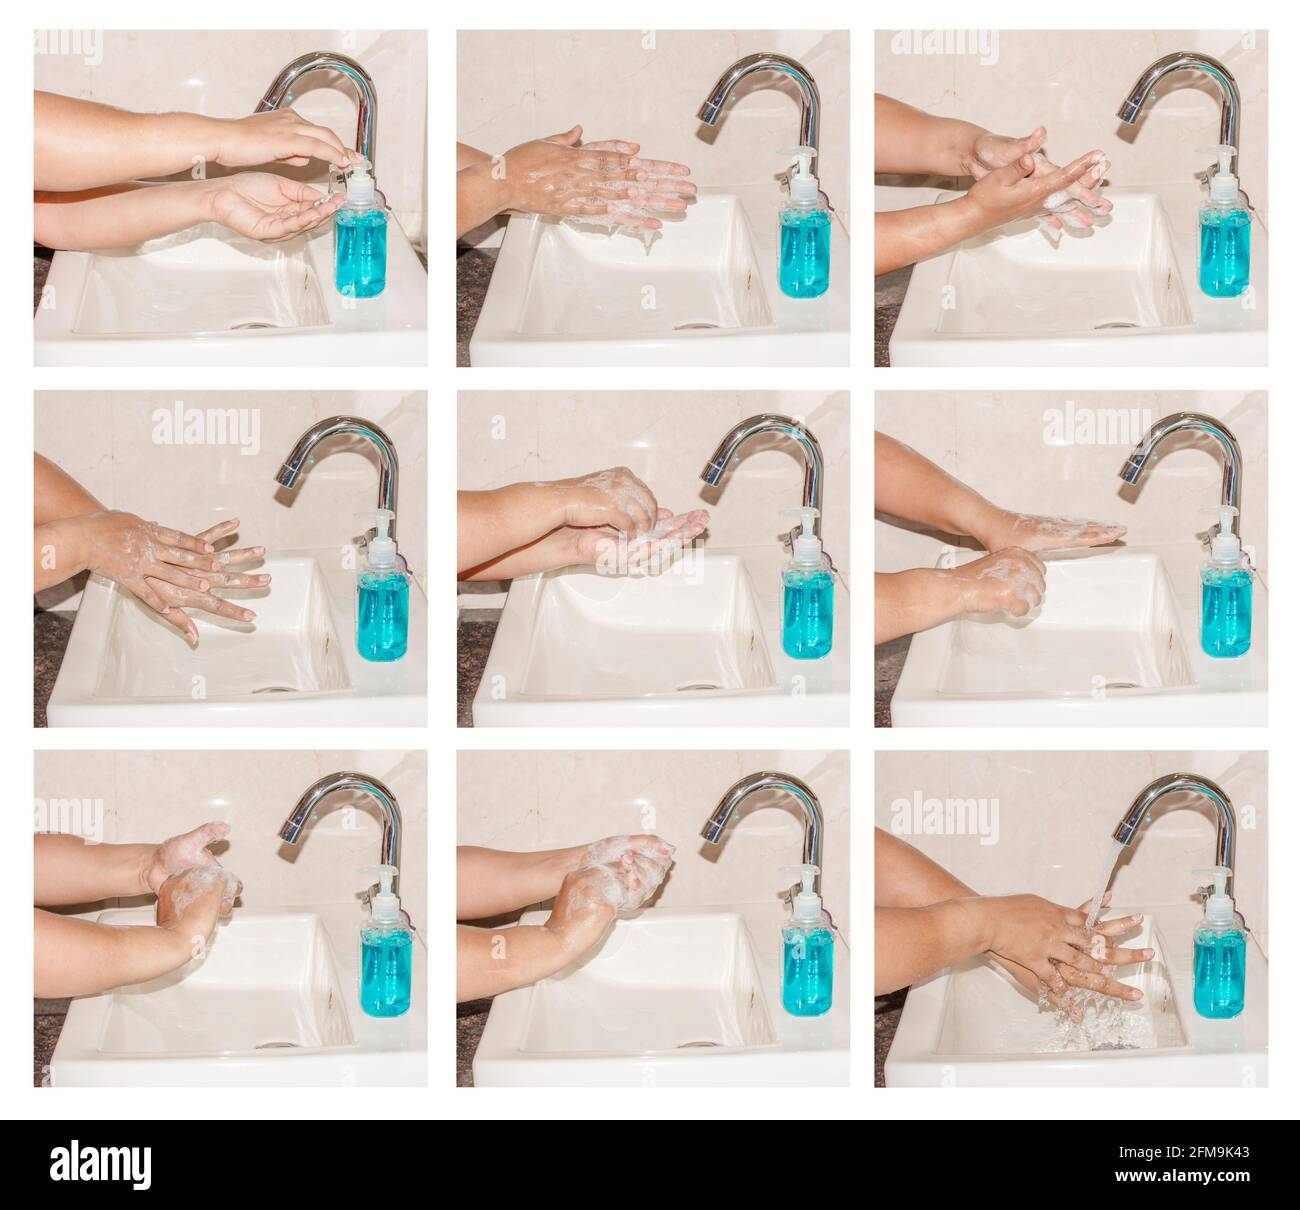 Hand Hygiene - Steps of Cleaning Hands with Hand washing Soap, Corona virus prevention hand wash steps with soap Stock Photo